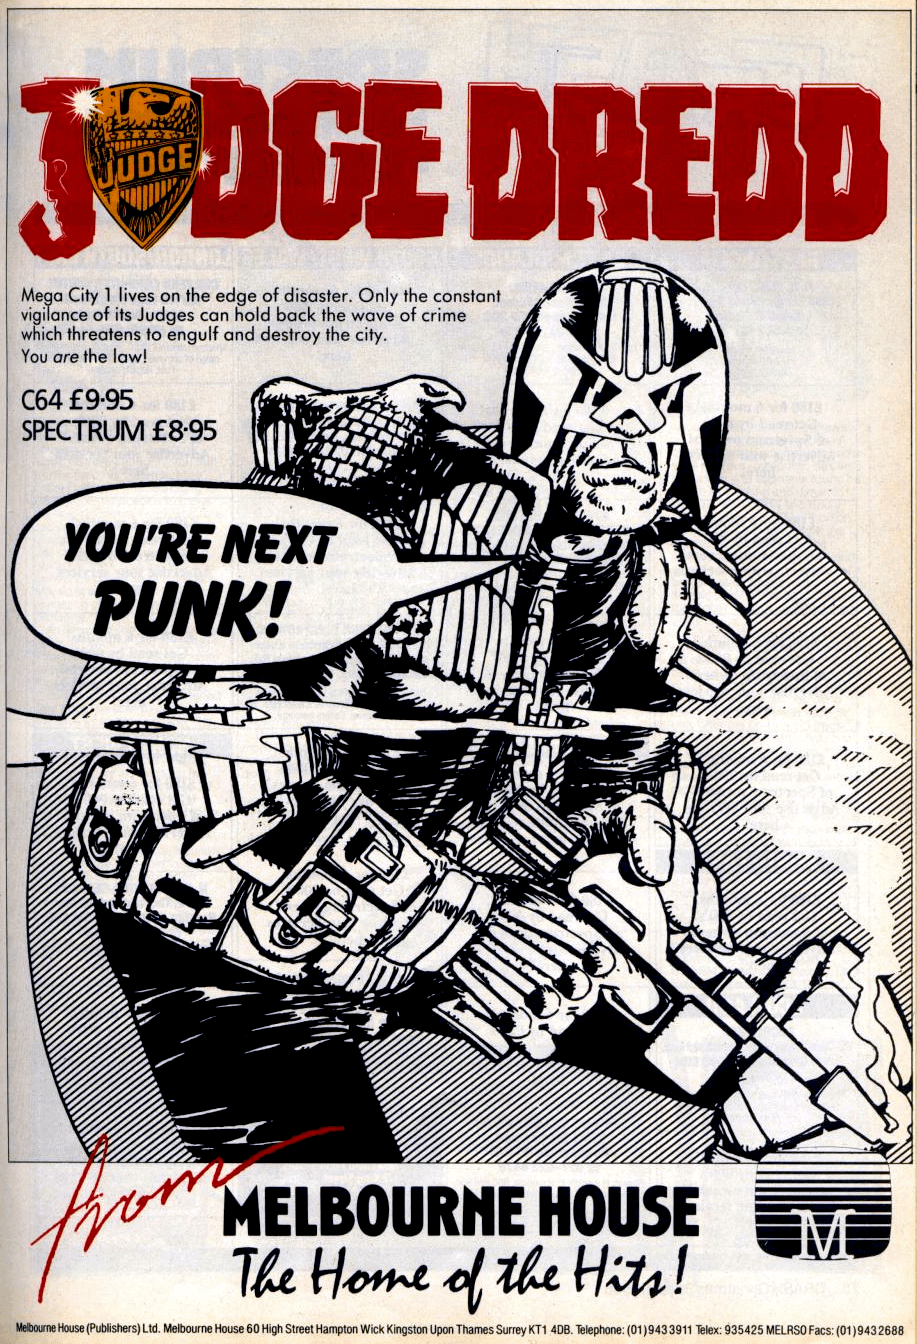 Image For Post | **Description**  
You are Judge Dredd. Your job is to track down unsolved crimes in Mega City and solve them. To do this you have your Lawmaster bike and your Lawgiver gun.

In Mega City solving crimes means shooting anyone who looks like a threat, a perp, a seed, and that's just about everyone.

It's a nice idea though. You start on a screen that represents Mega City. Around the city crimes are being committed, these are represented by white tiles saying 'arson' murder' etc. Your task is to navigate to each crime and hit the fire button. This takes you into that location where you blow everyone away in a platform like shoot 'em up. Then it's exit the location, go to the next, and repeat.

While you're doing this there's a decent synth-rock sound track playing but no sound effects, just an on-screen comic book 'BLAM' when you fire your gun.